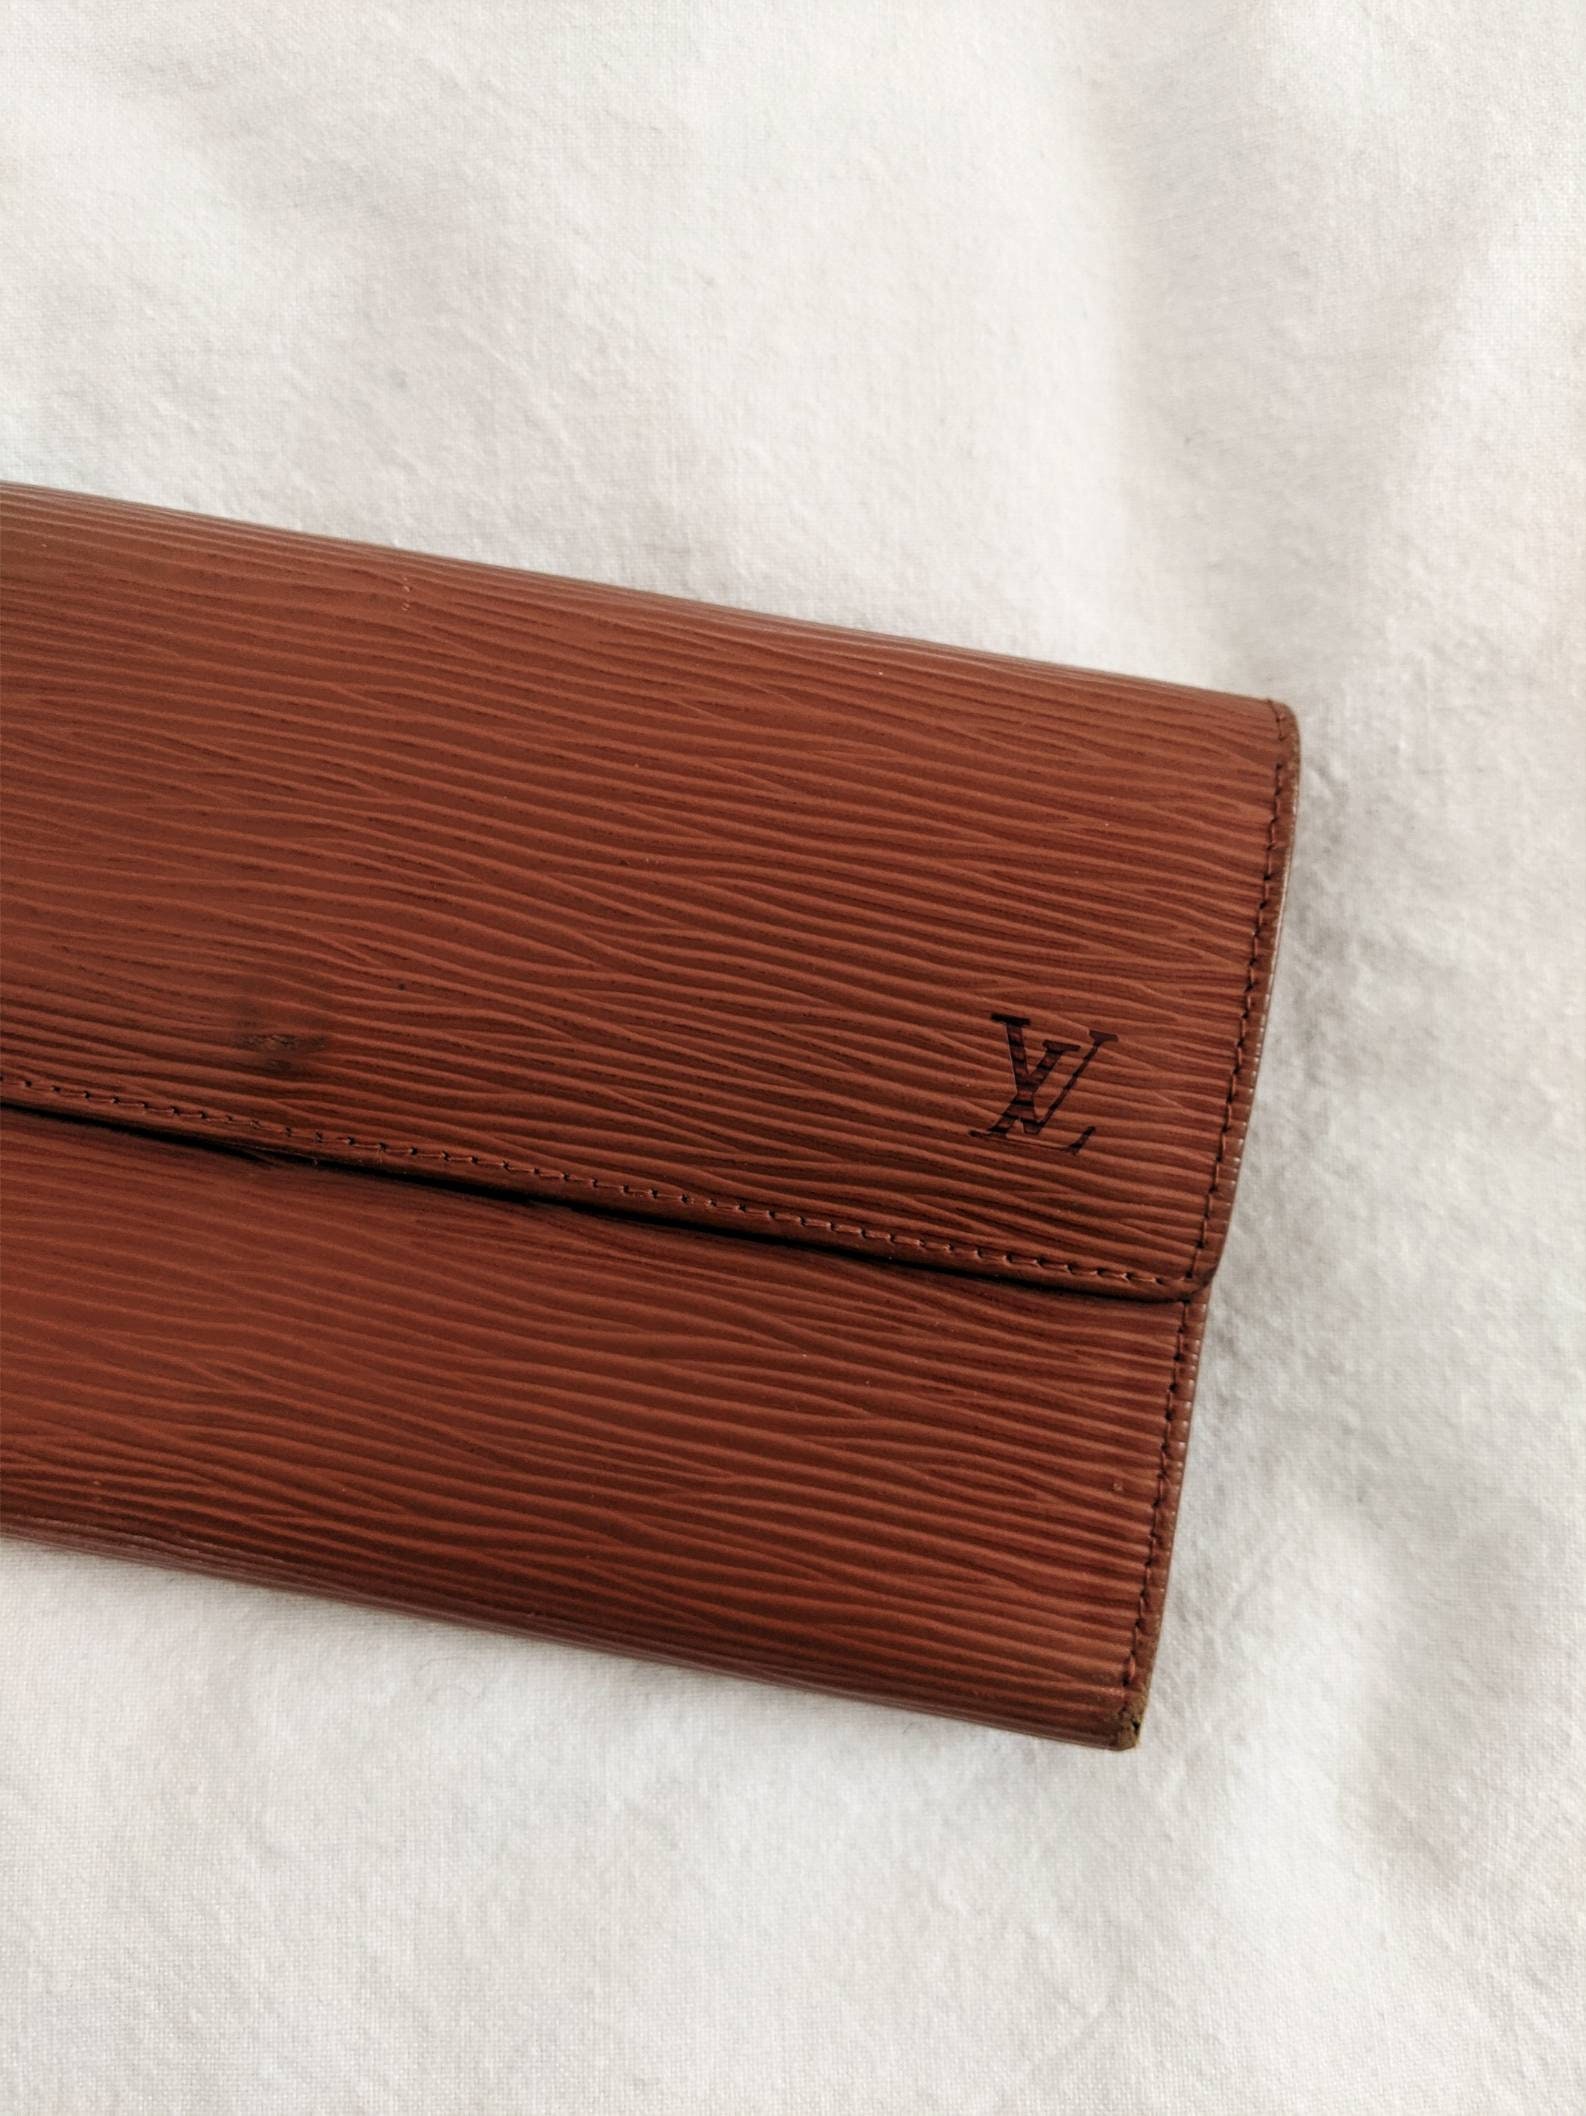 AUTHENTIC VINTAGE 1970S 1980S LOUIS VUITTON MADE IN FRANCE MENS SLIM LEATHER  MONOGRAM WALLET #4908